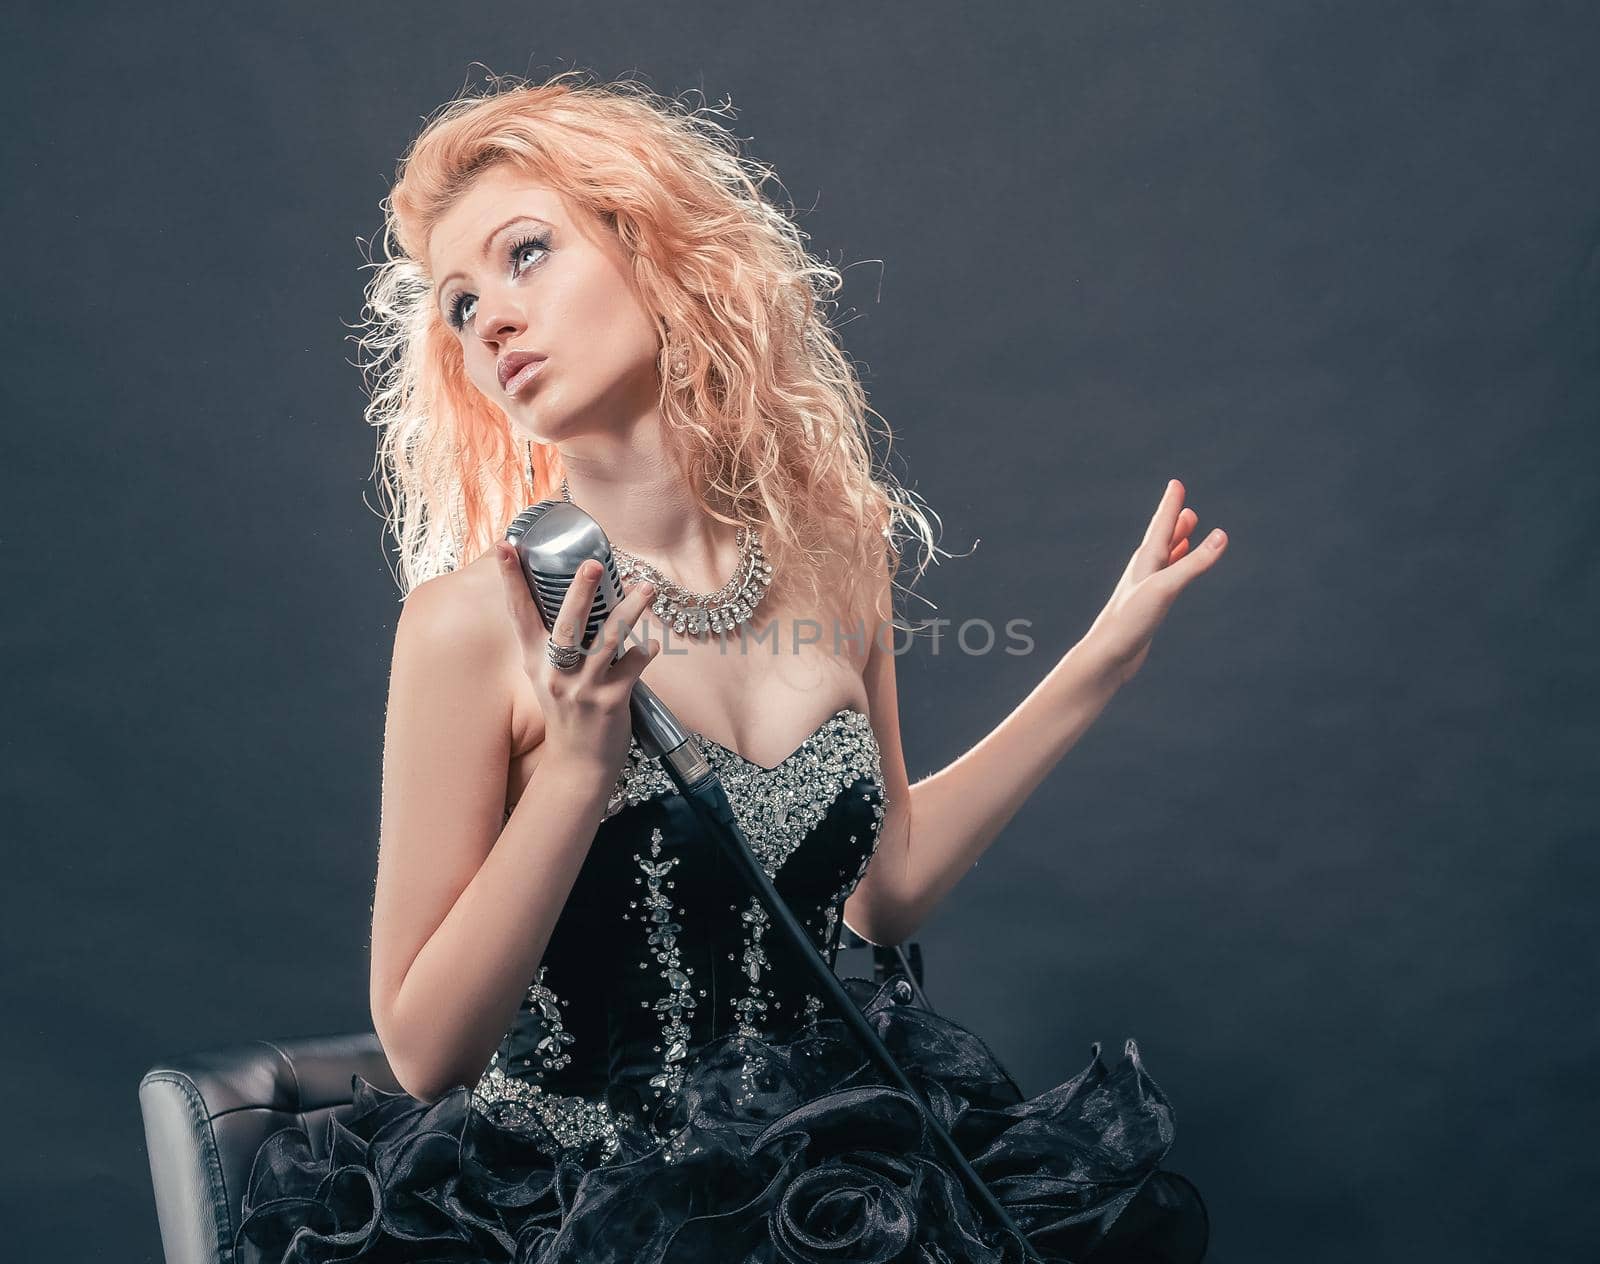 beautiful girl singer performing a song sitting on a chair.isolated on a dark background